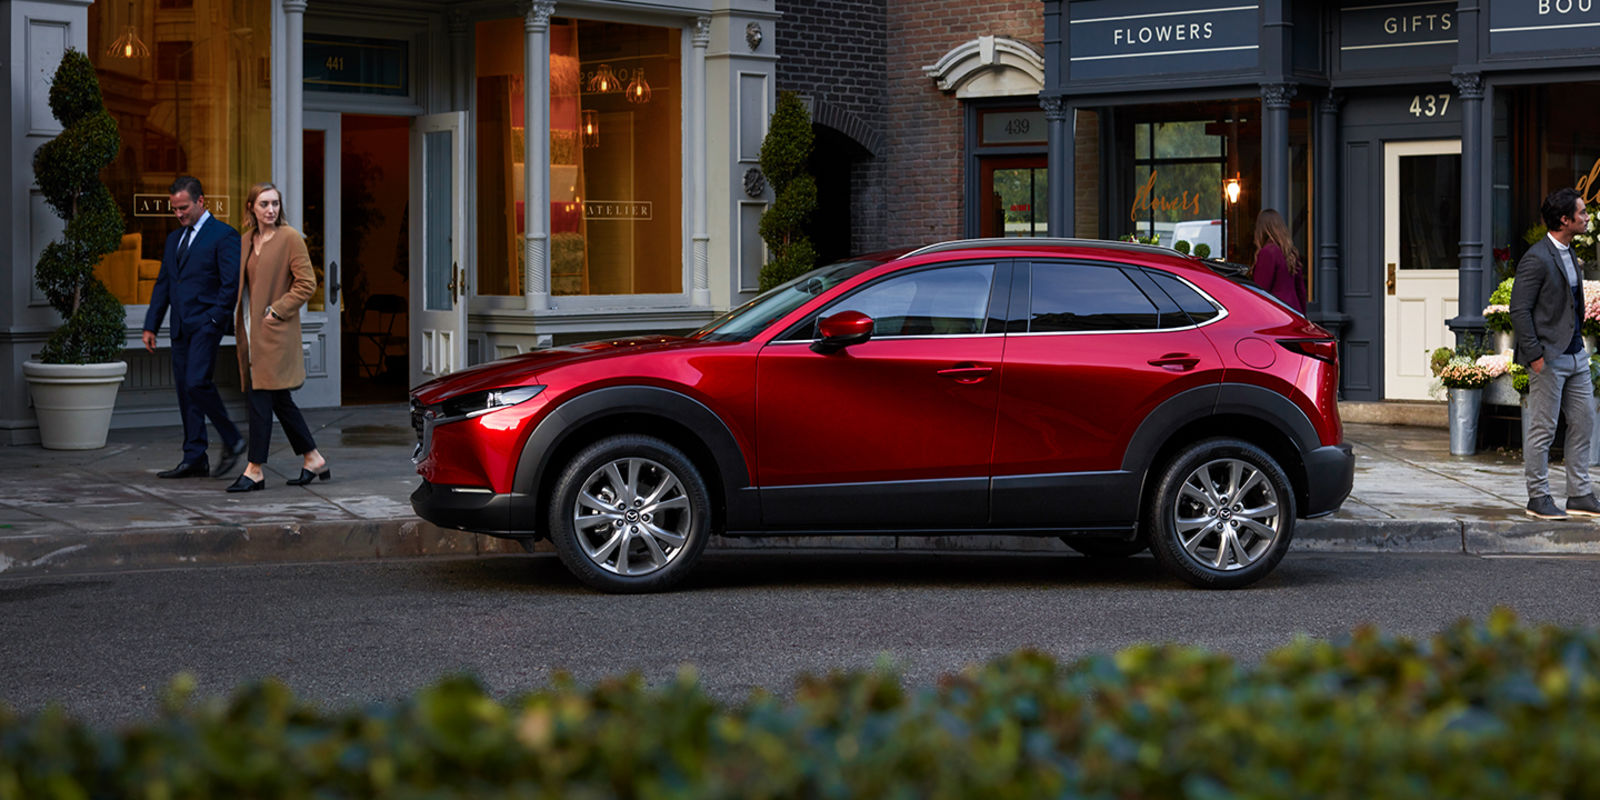 Illustration for article titled The 2020 Mazda CX-30 starts at $21,900